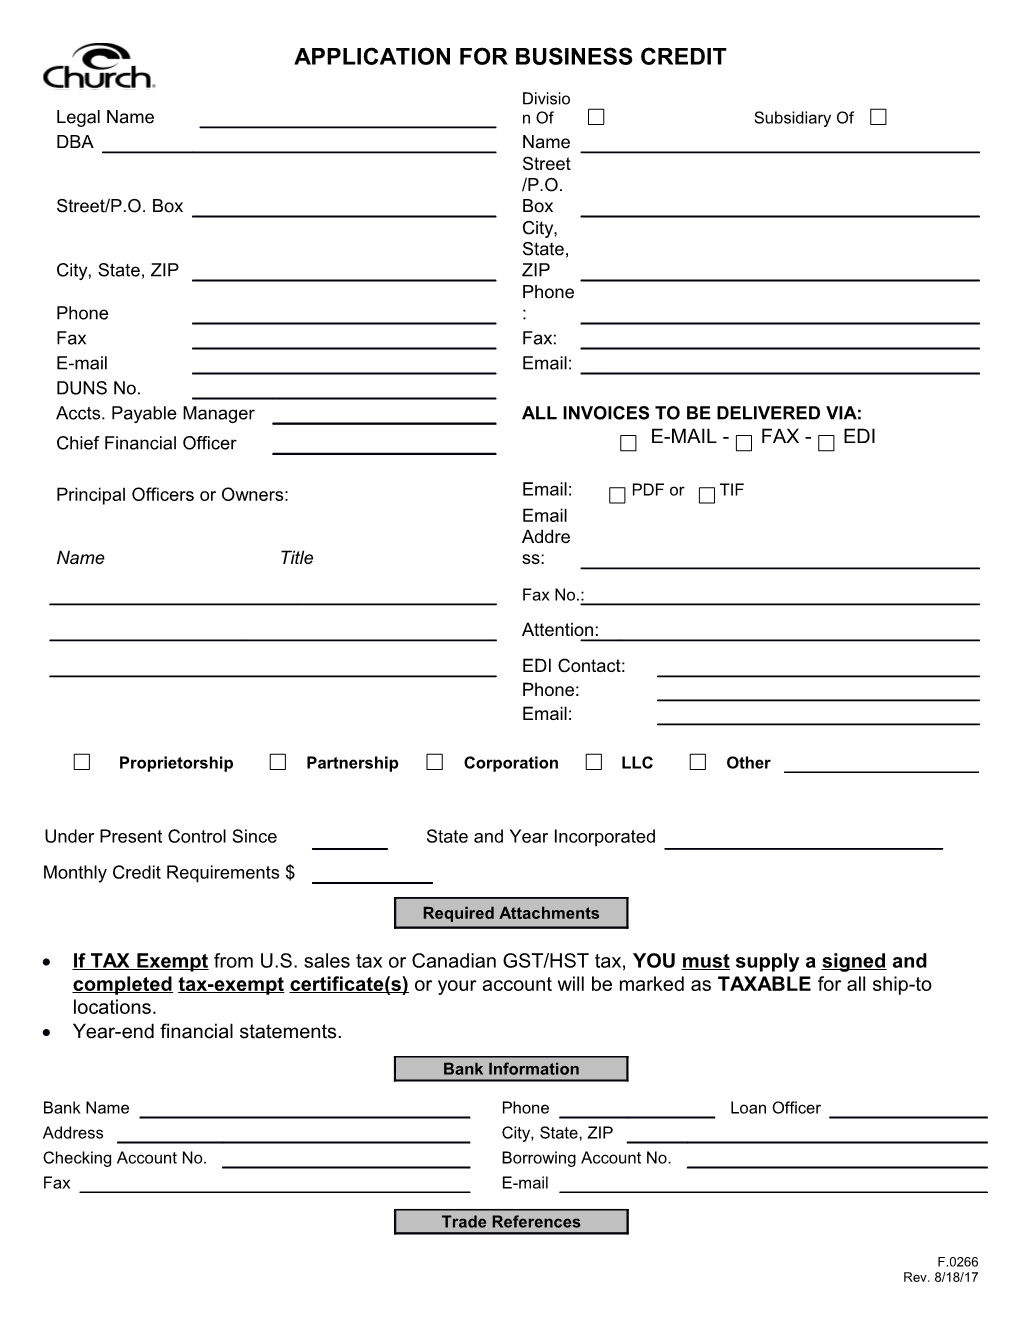 Application for Business Credit - Church